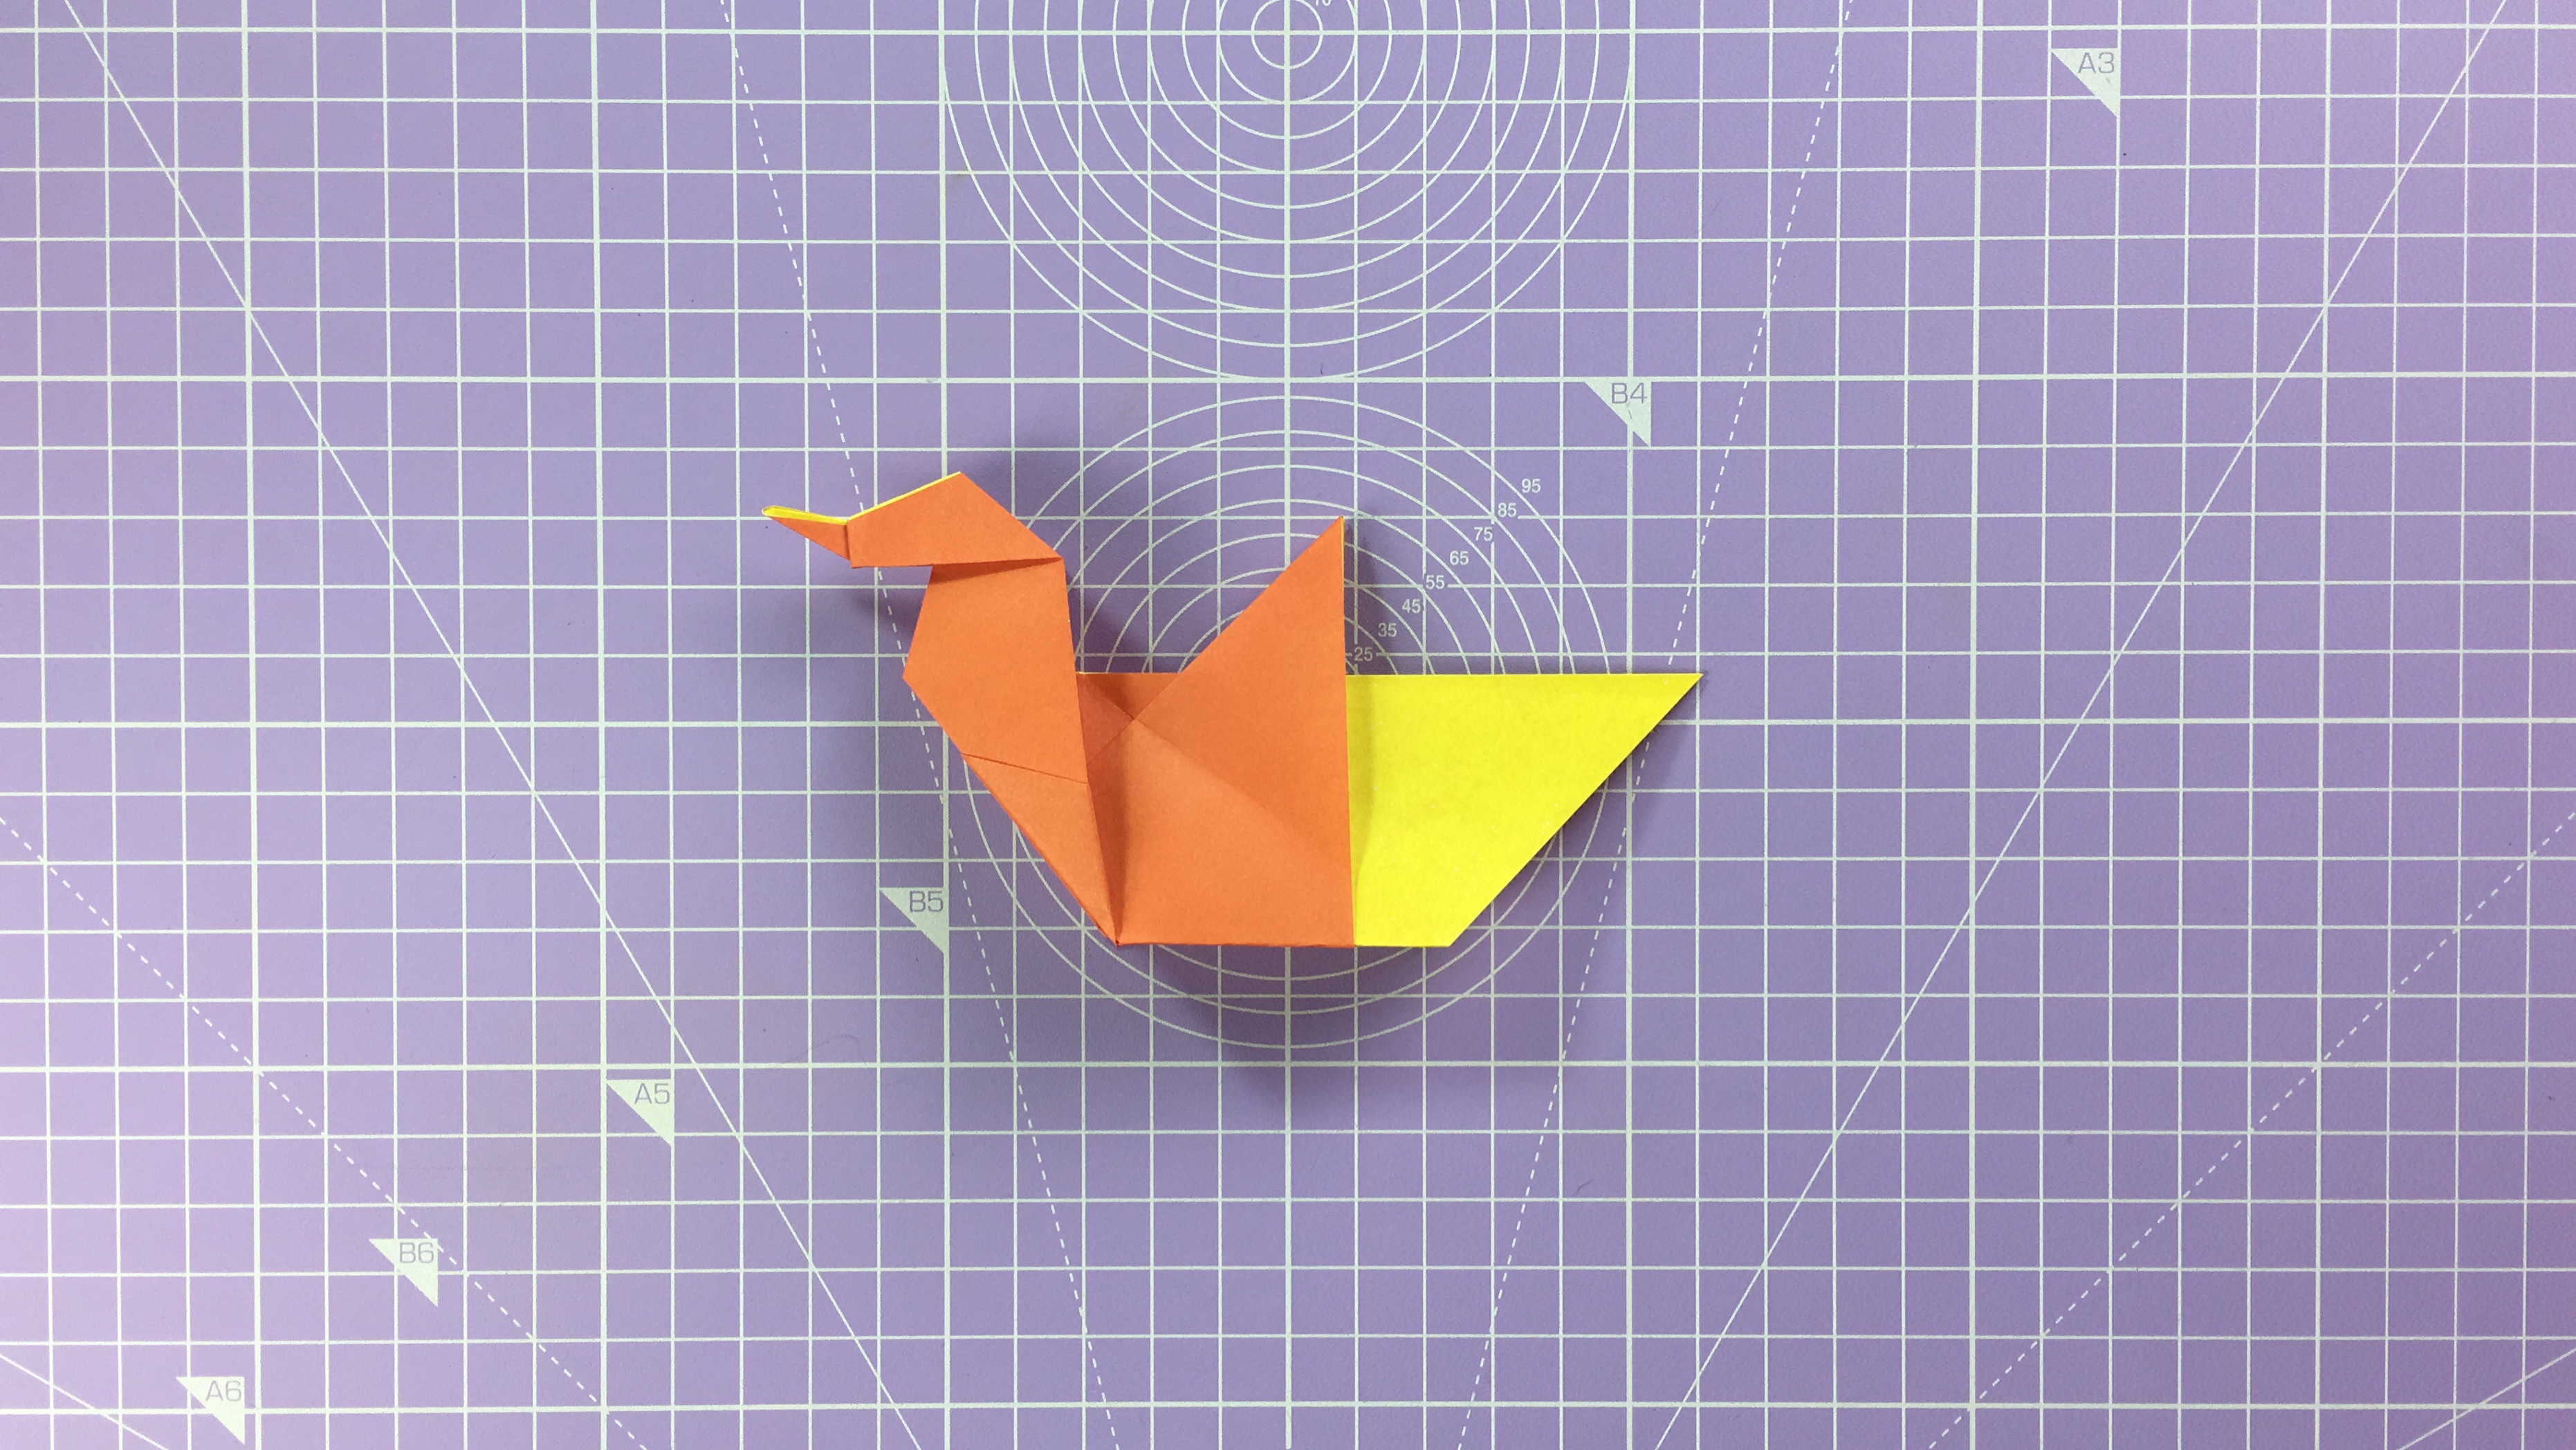 How to make an origami duck - step 15